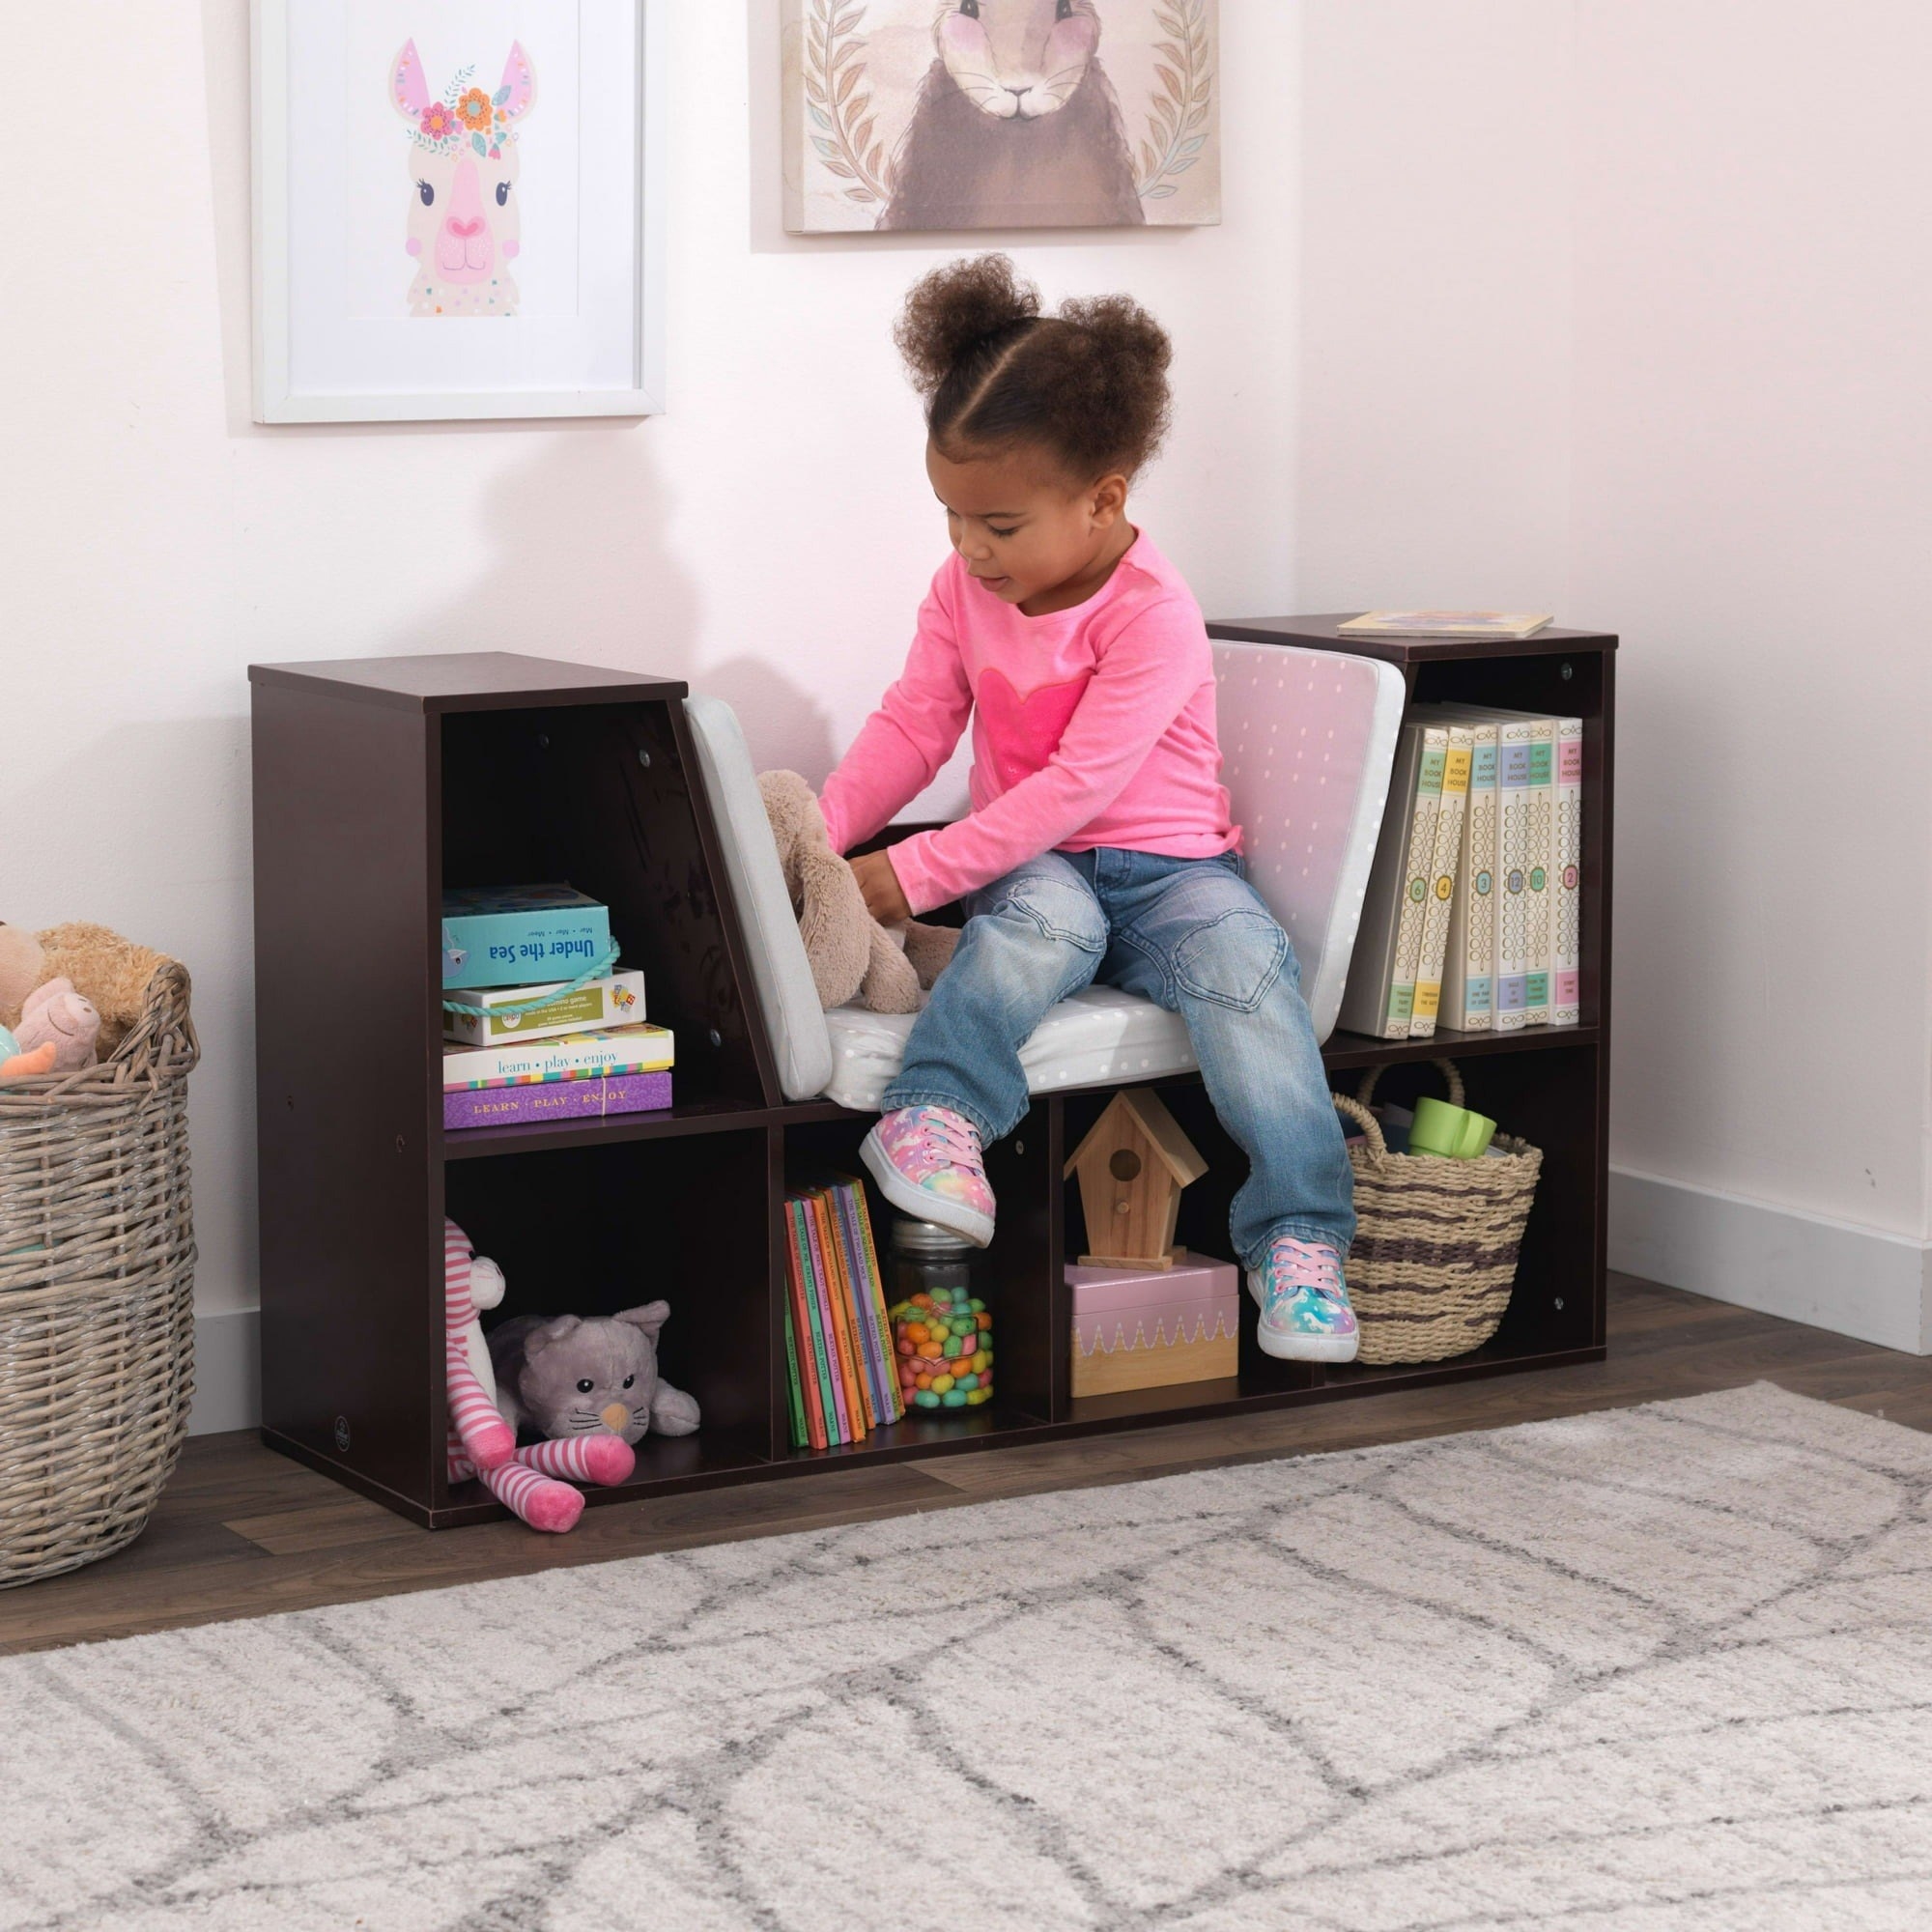 A little girl in her reading nook with a stuffed bunny.